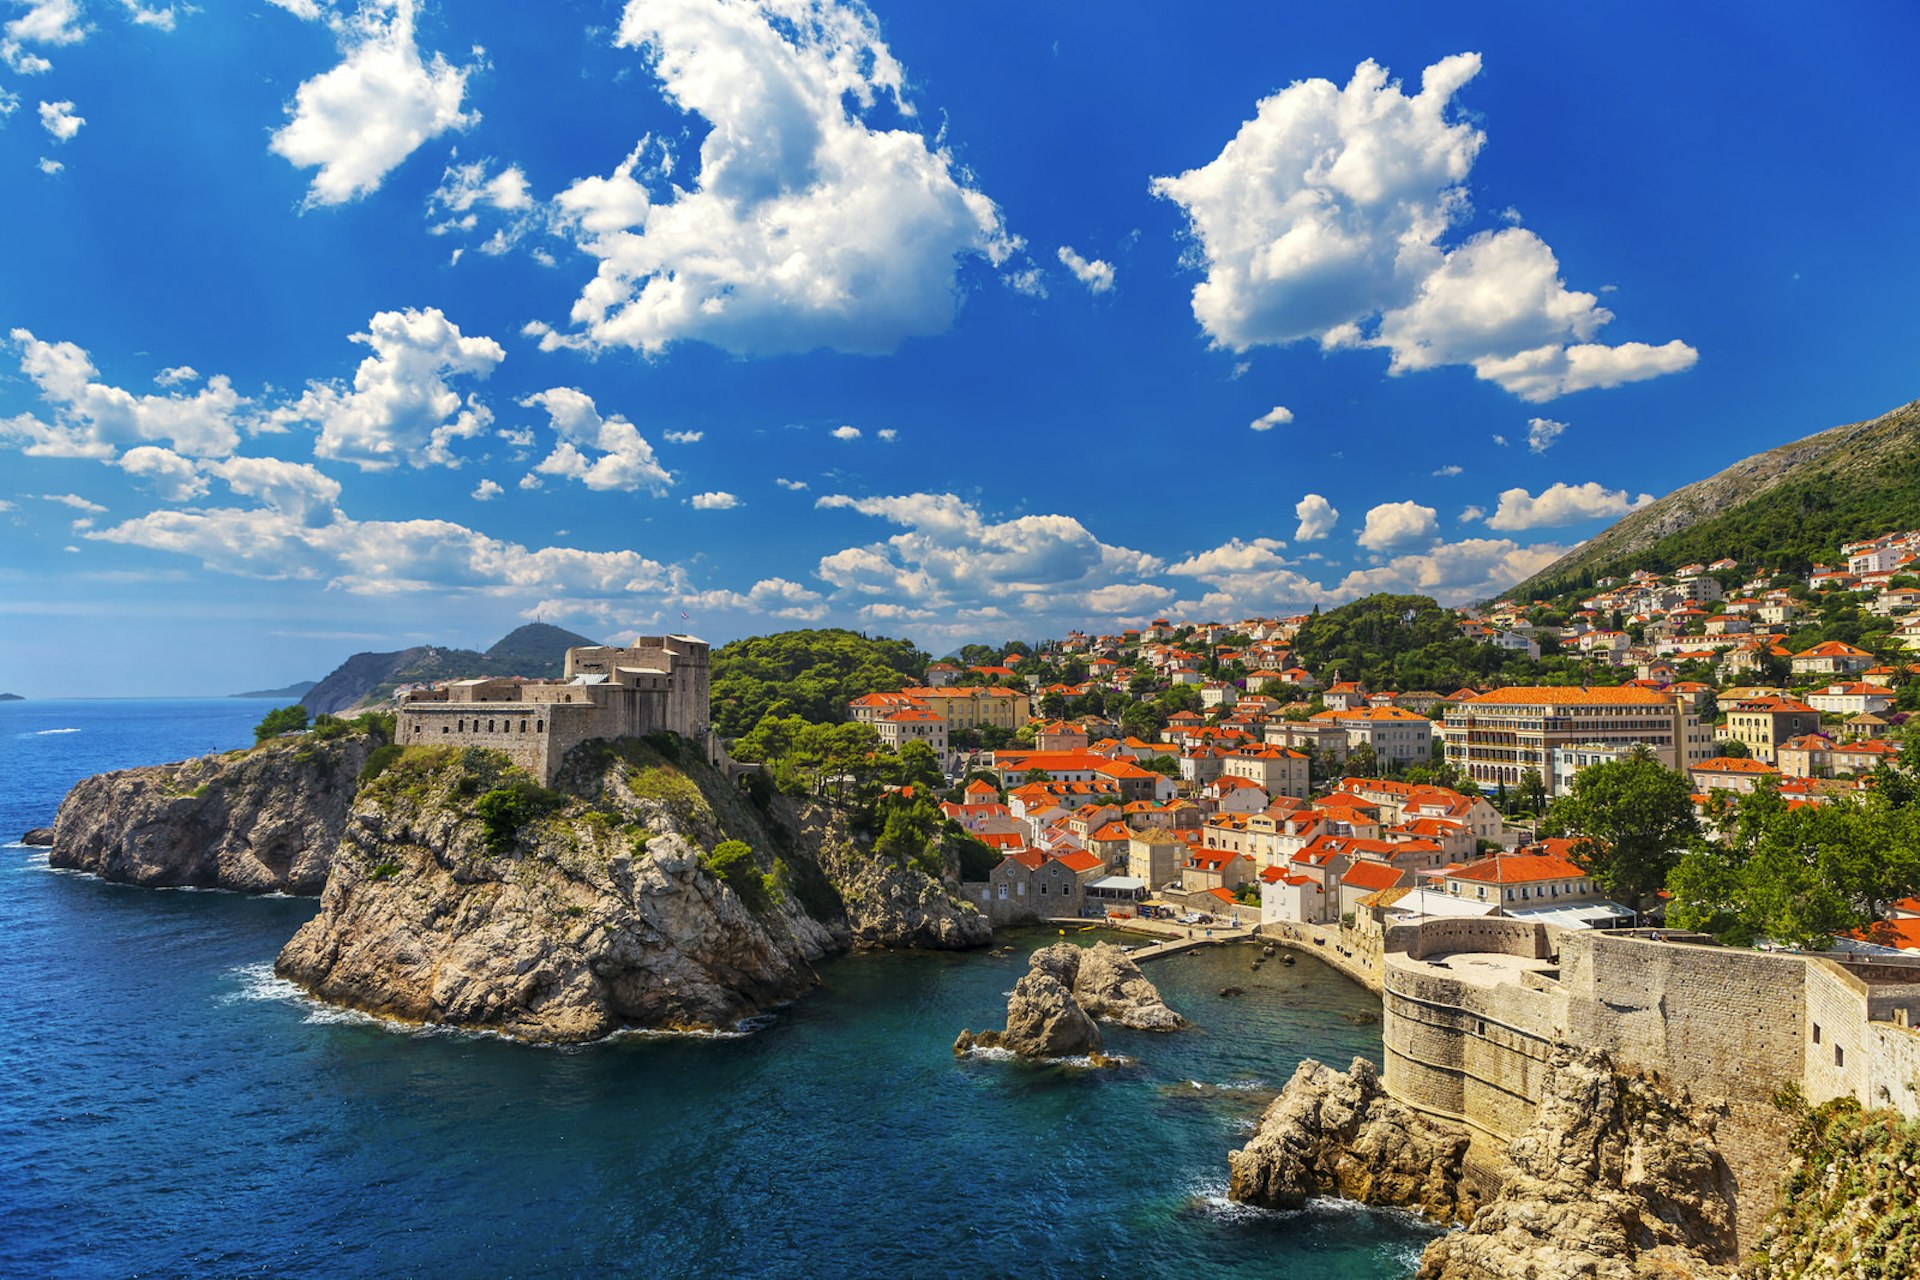 The postcard-perfect city of Dubrovnik, Croatia, awaits drivers of the country's Adriatic Coast © WitR / Getty Images